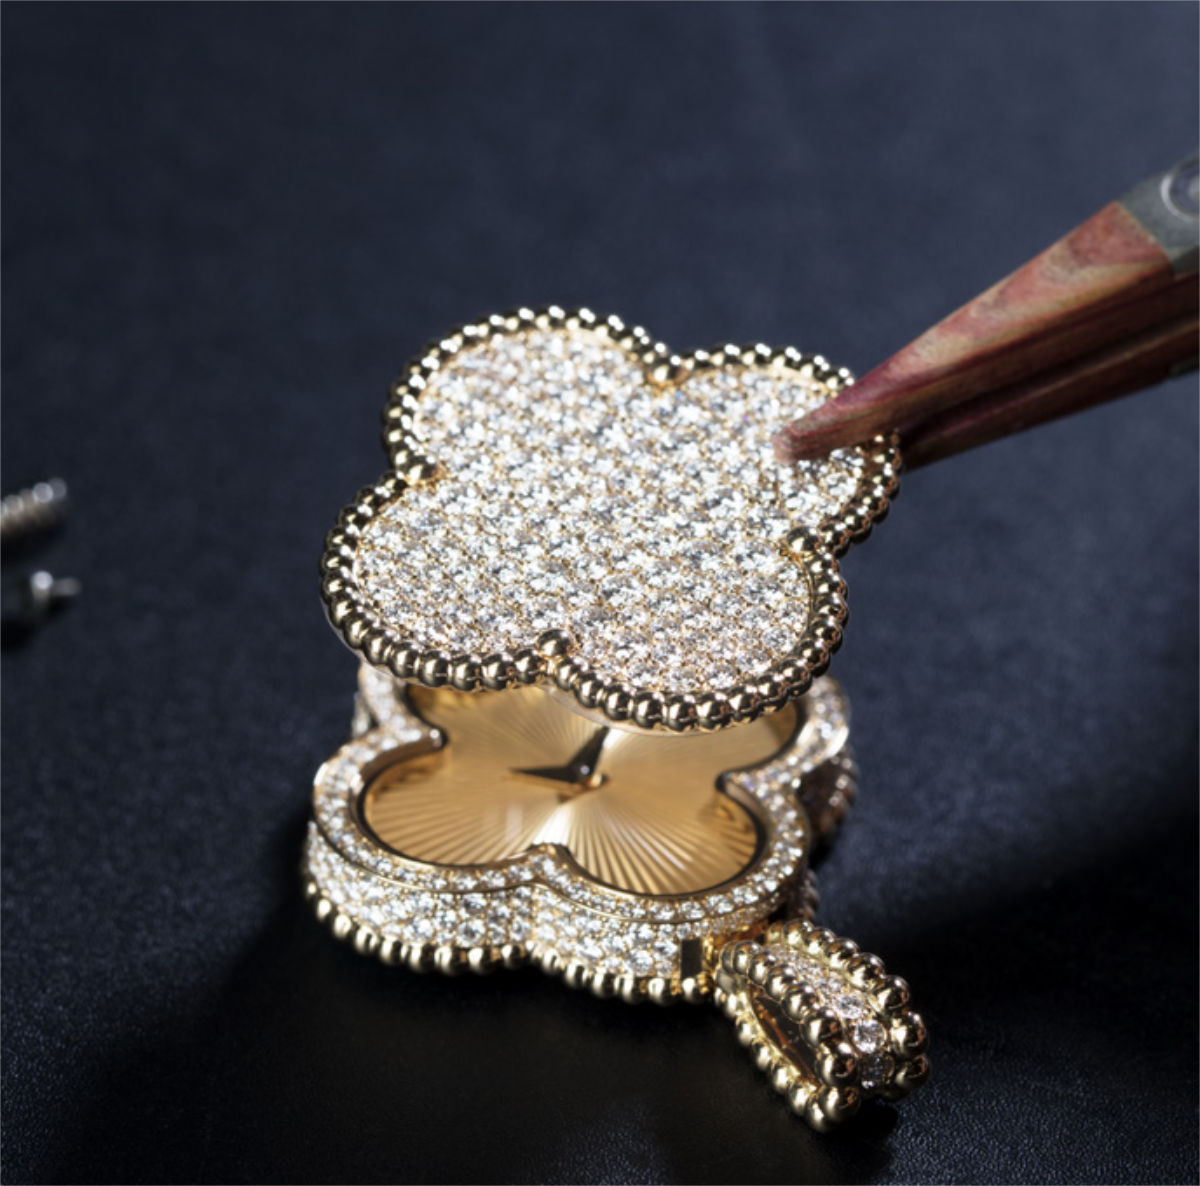 Van Cleef & Arpels' Alhambra Collection Welcomes Four Secret Pendant Watch  Models - Luxferity Magazine